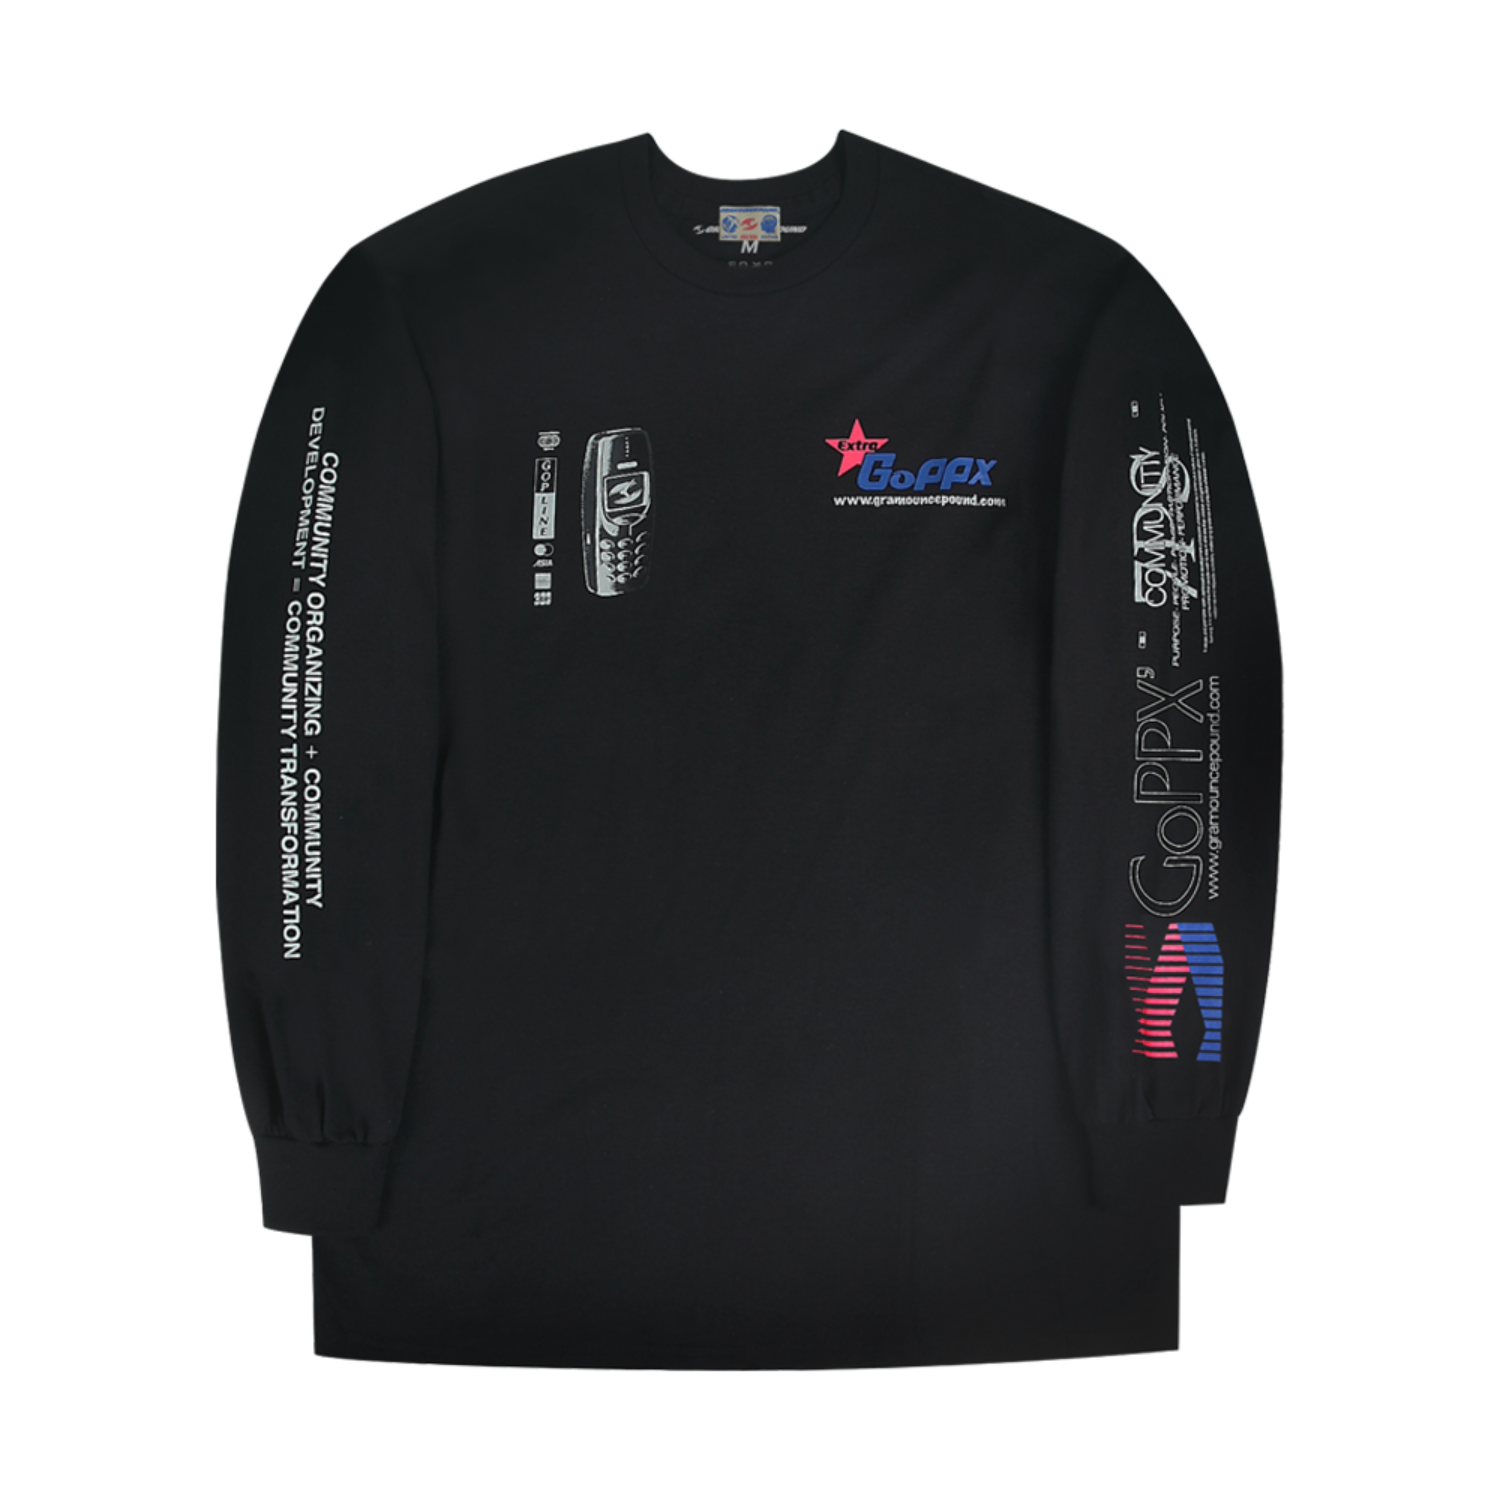 7 Rules L/S Tee